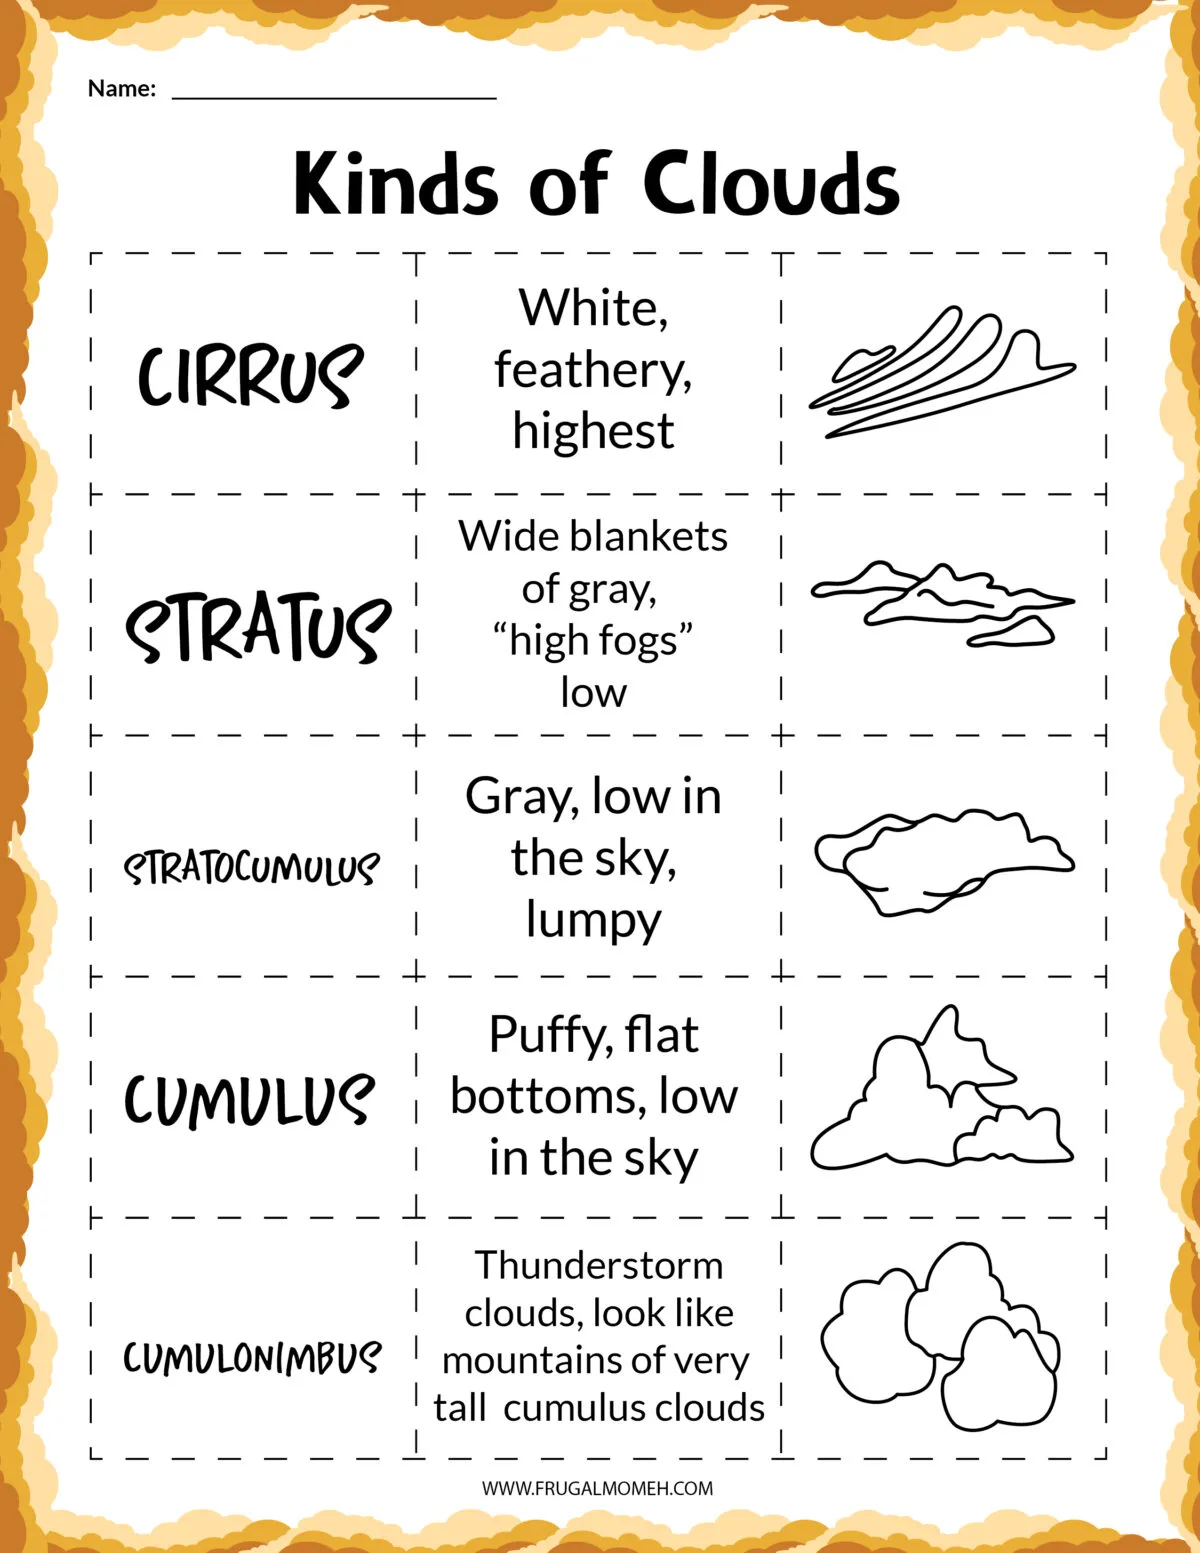 Kinds of clouds printable sheet.